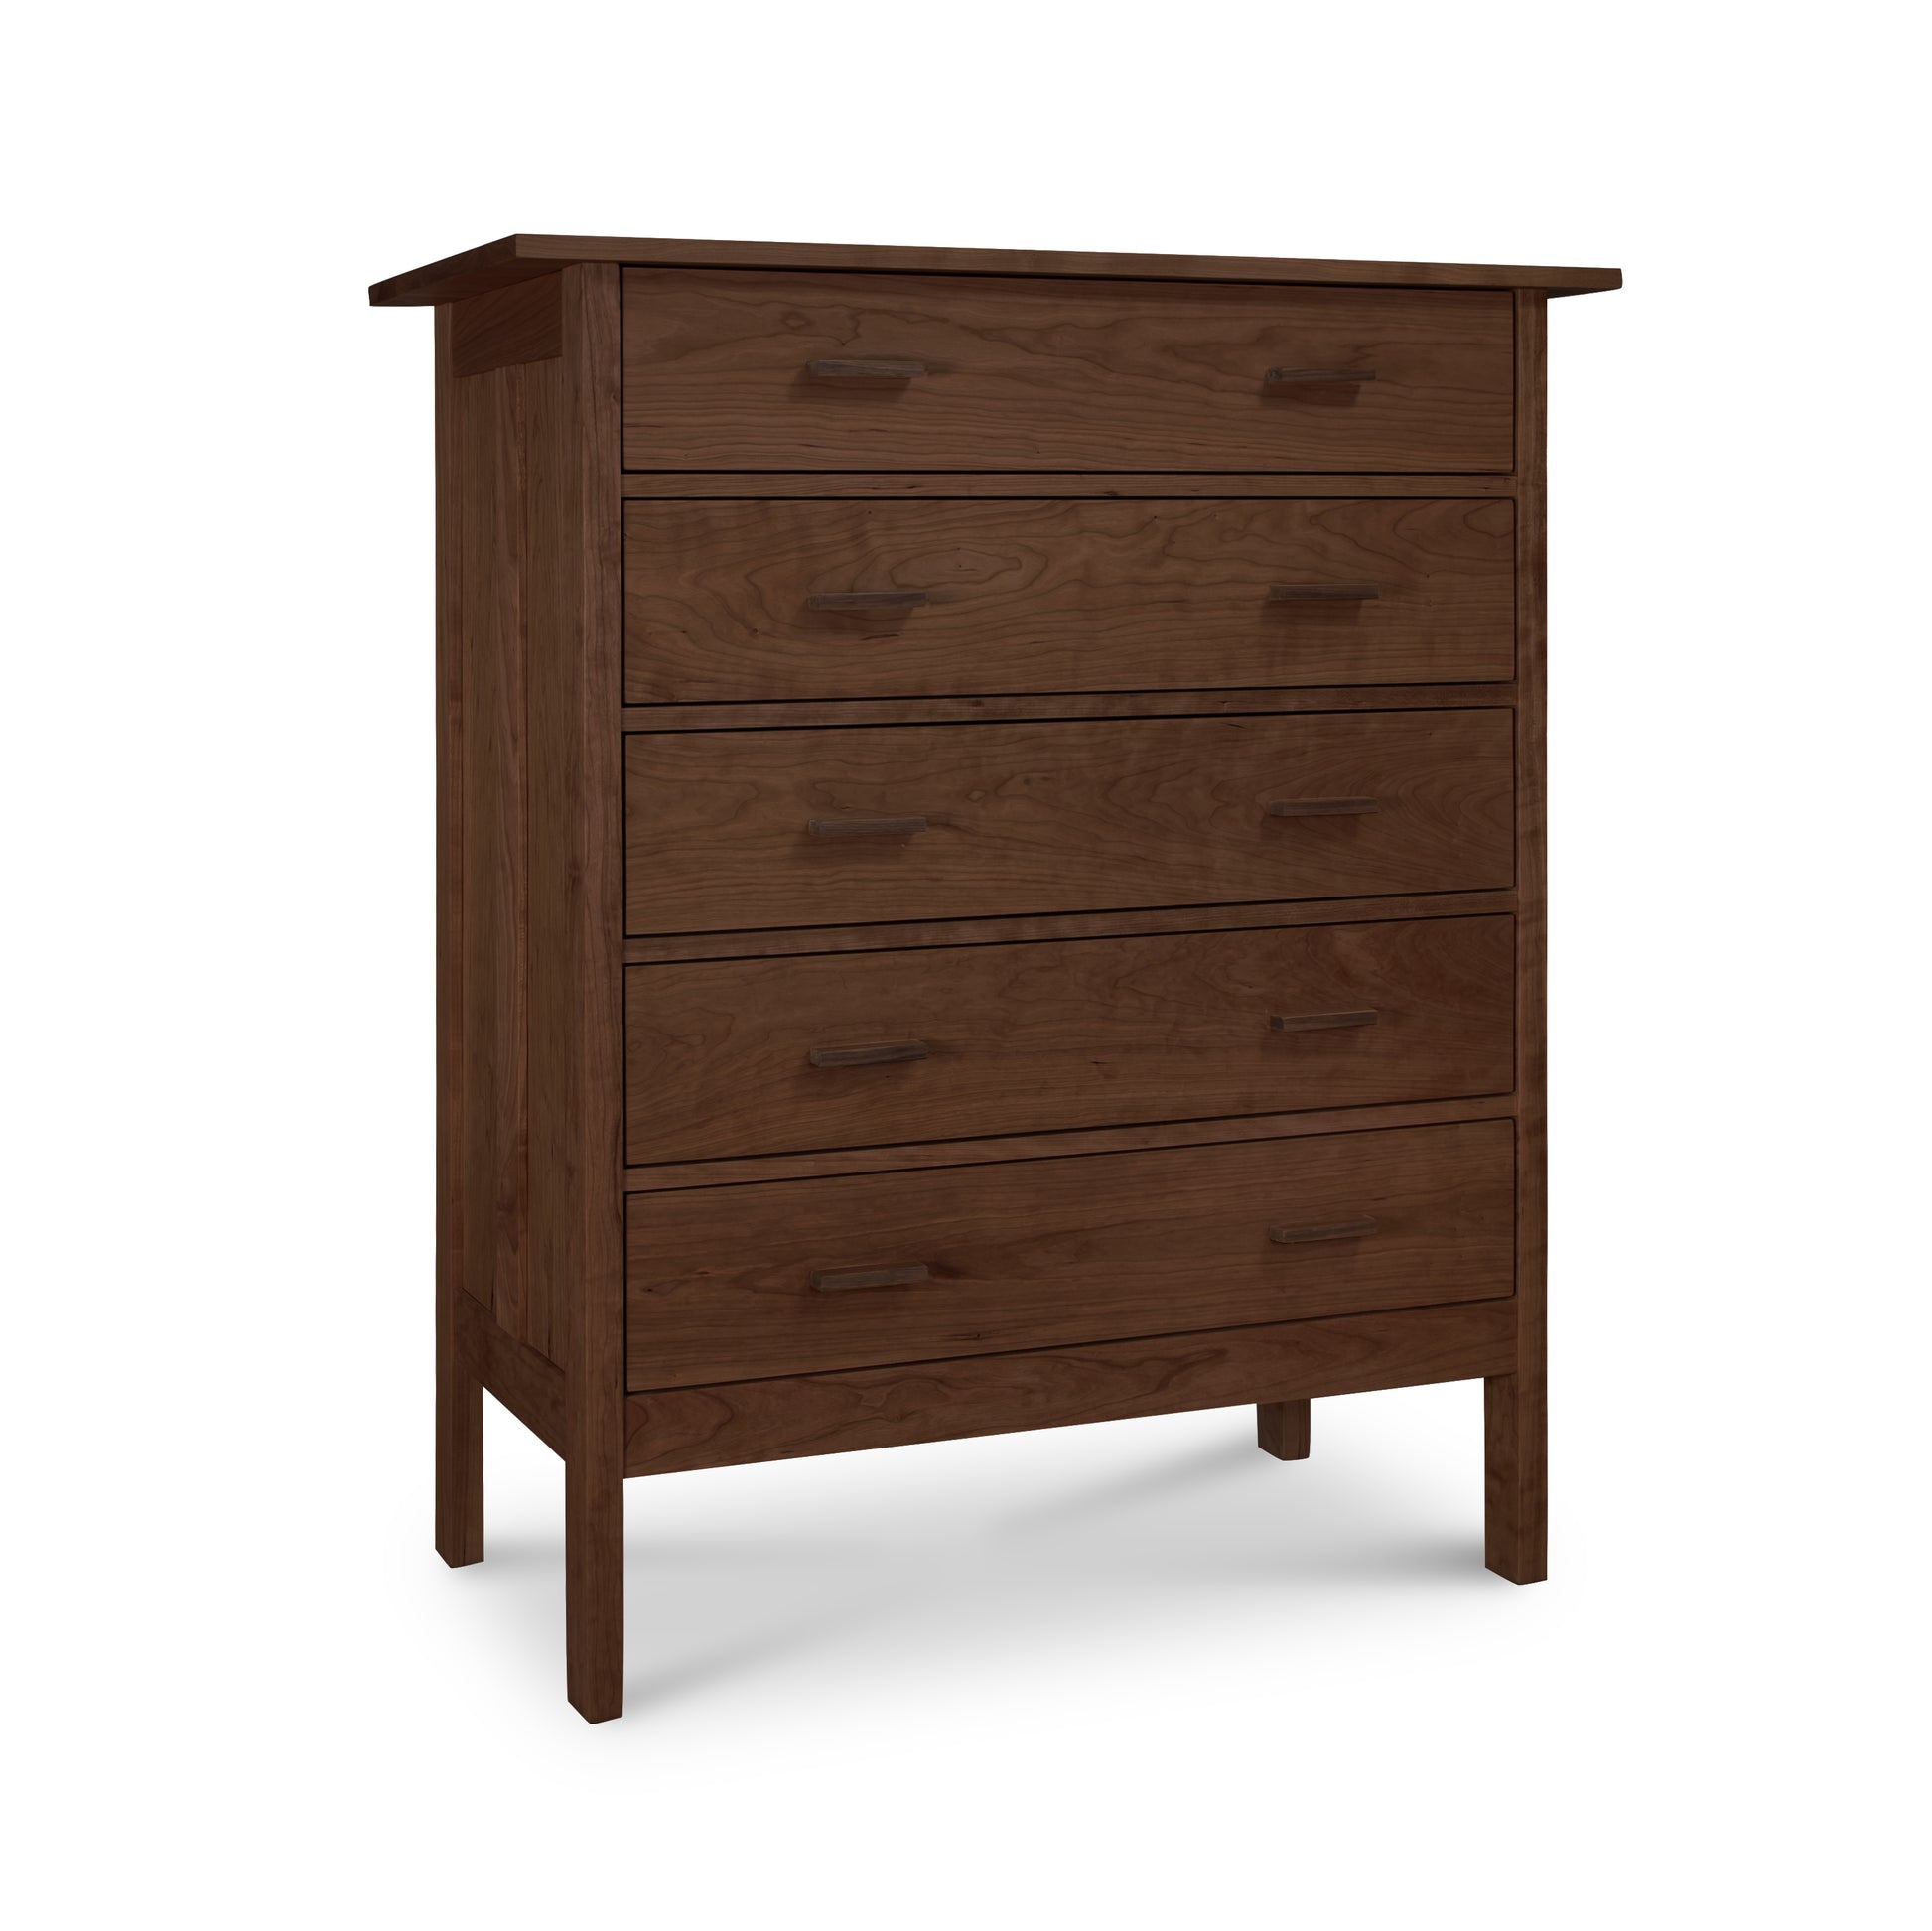 A Vermont Furniture Designs Modern Craftsman 5-Drawer Chest with simple handles on a plain white background.